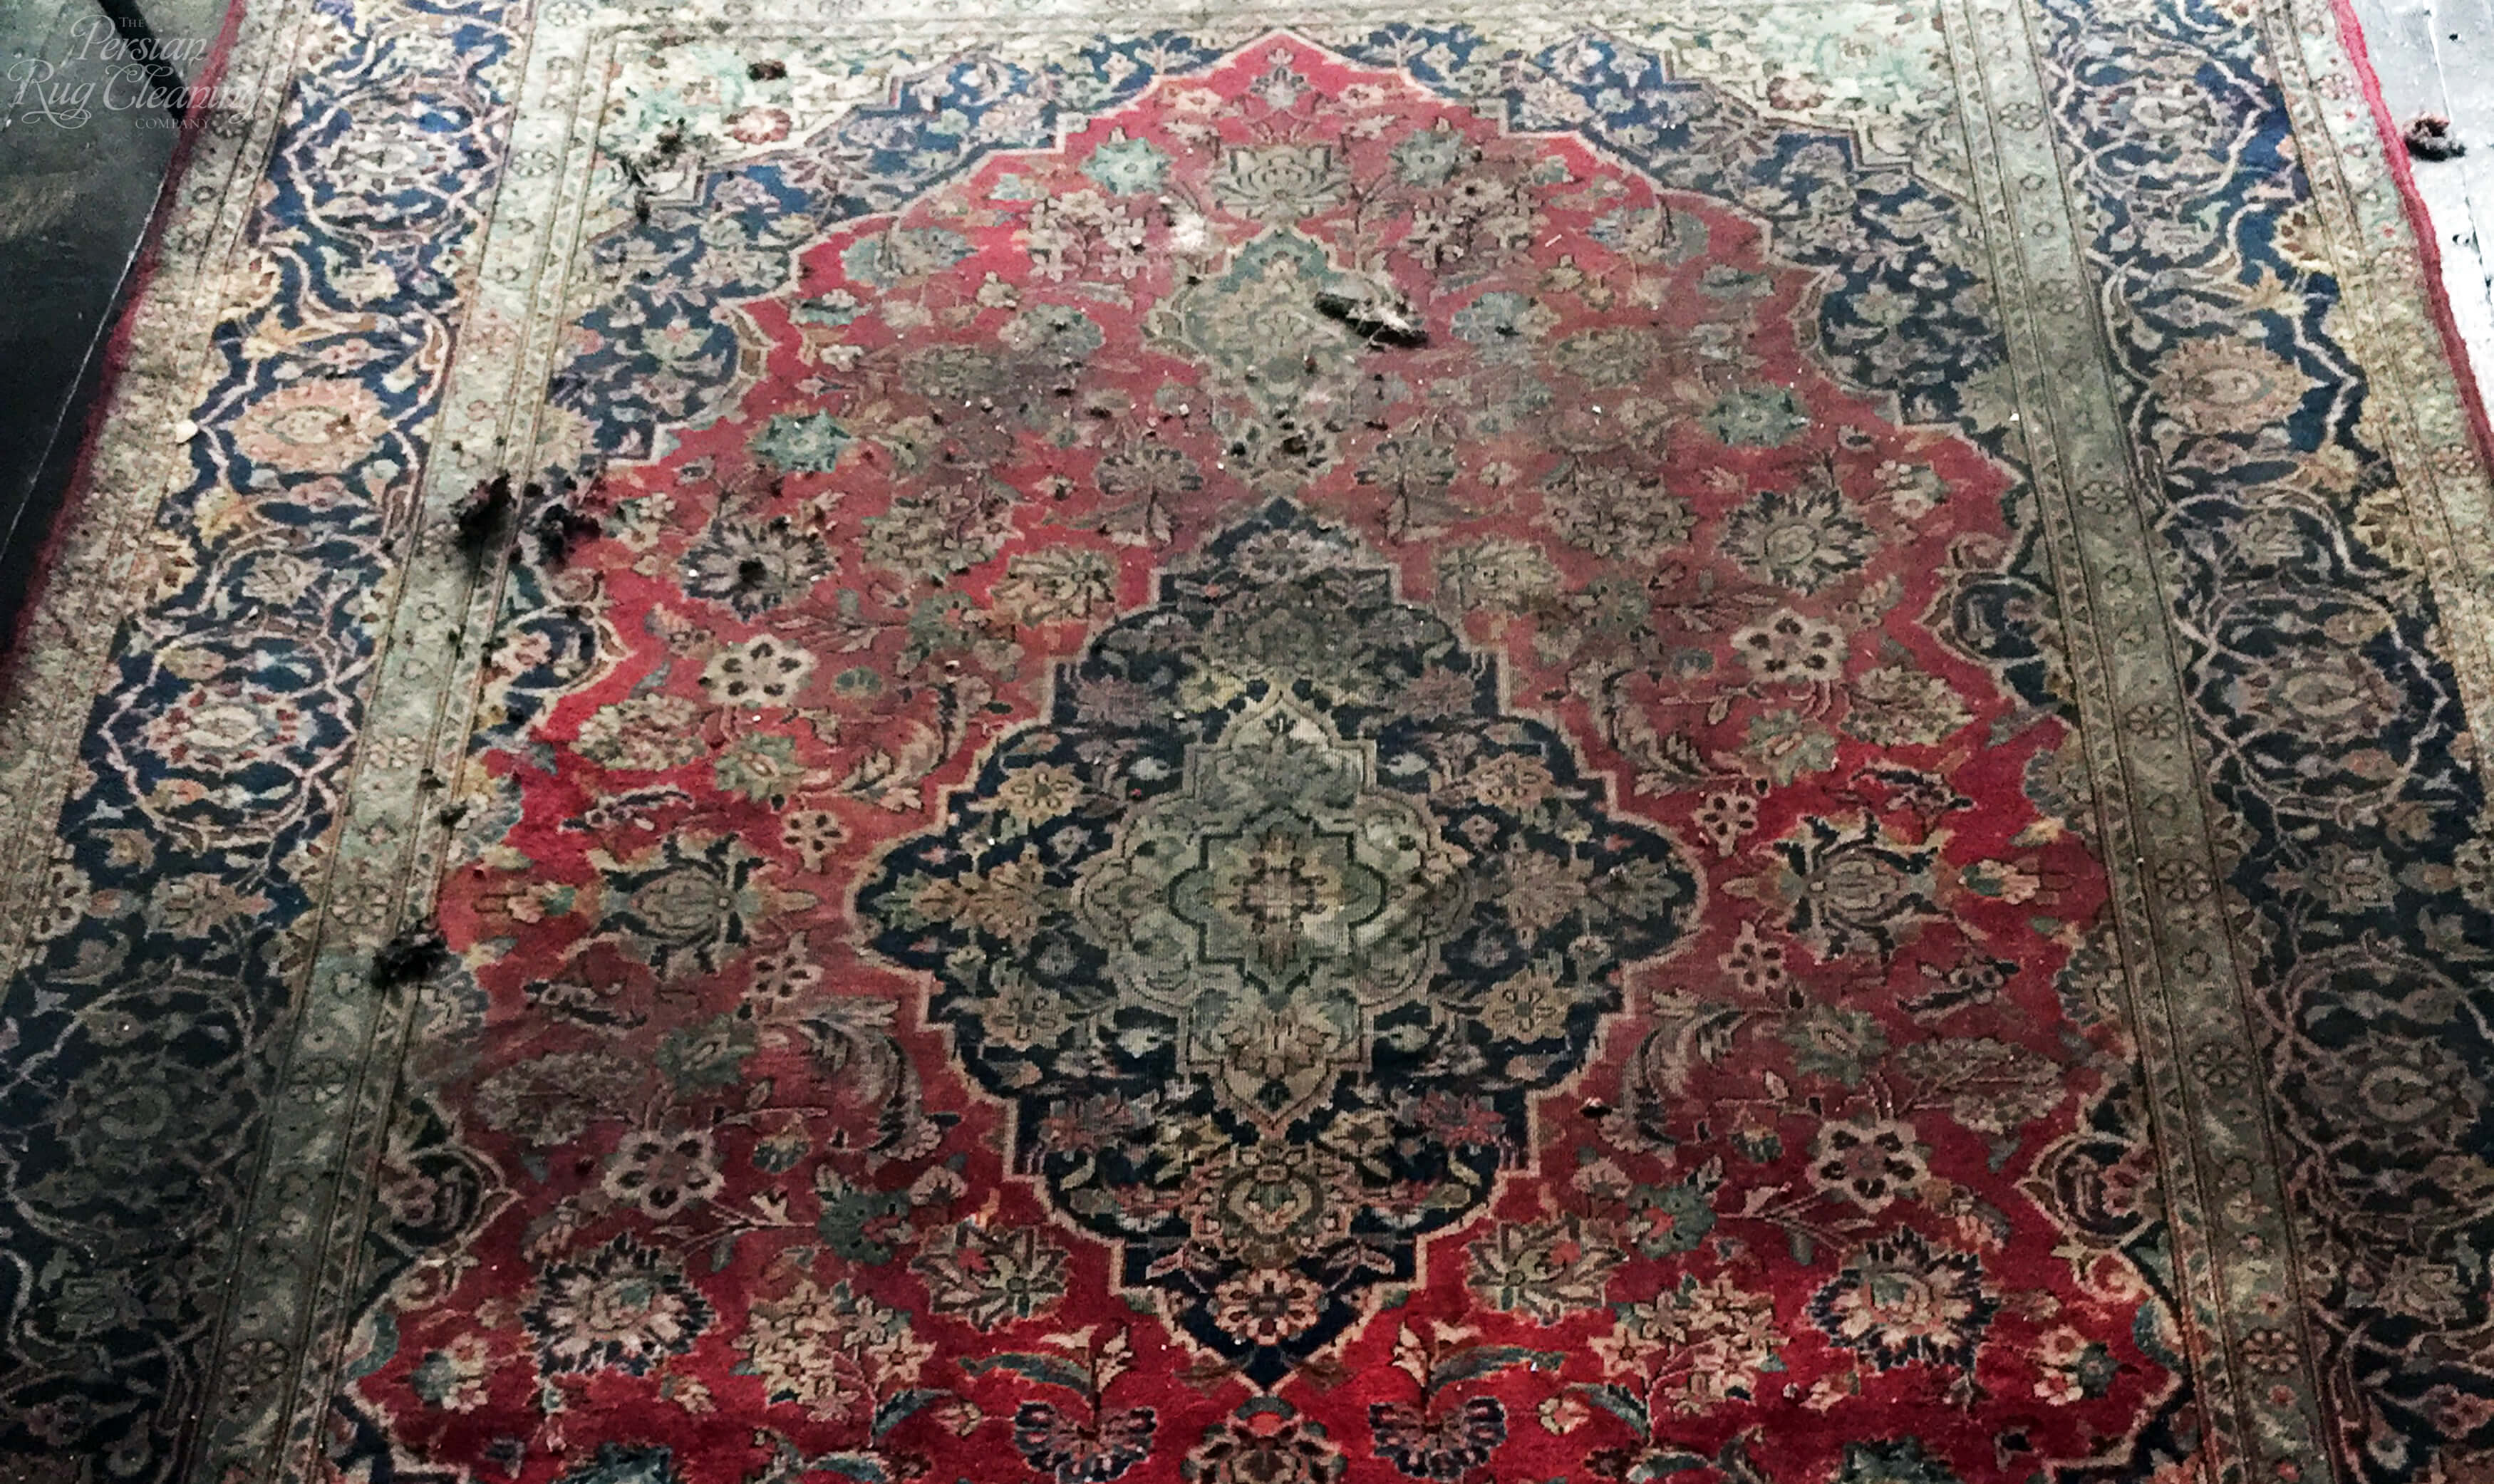 How often should I clean my Persian rug? - Filthy rug